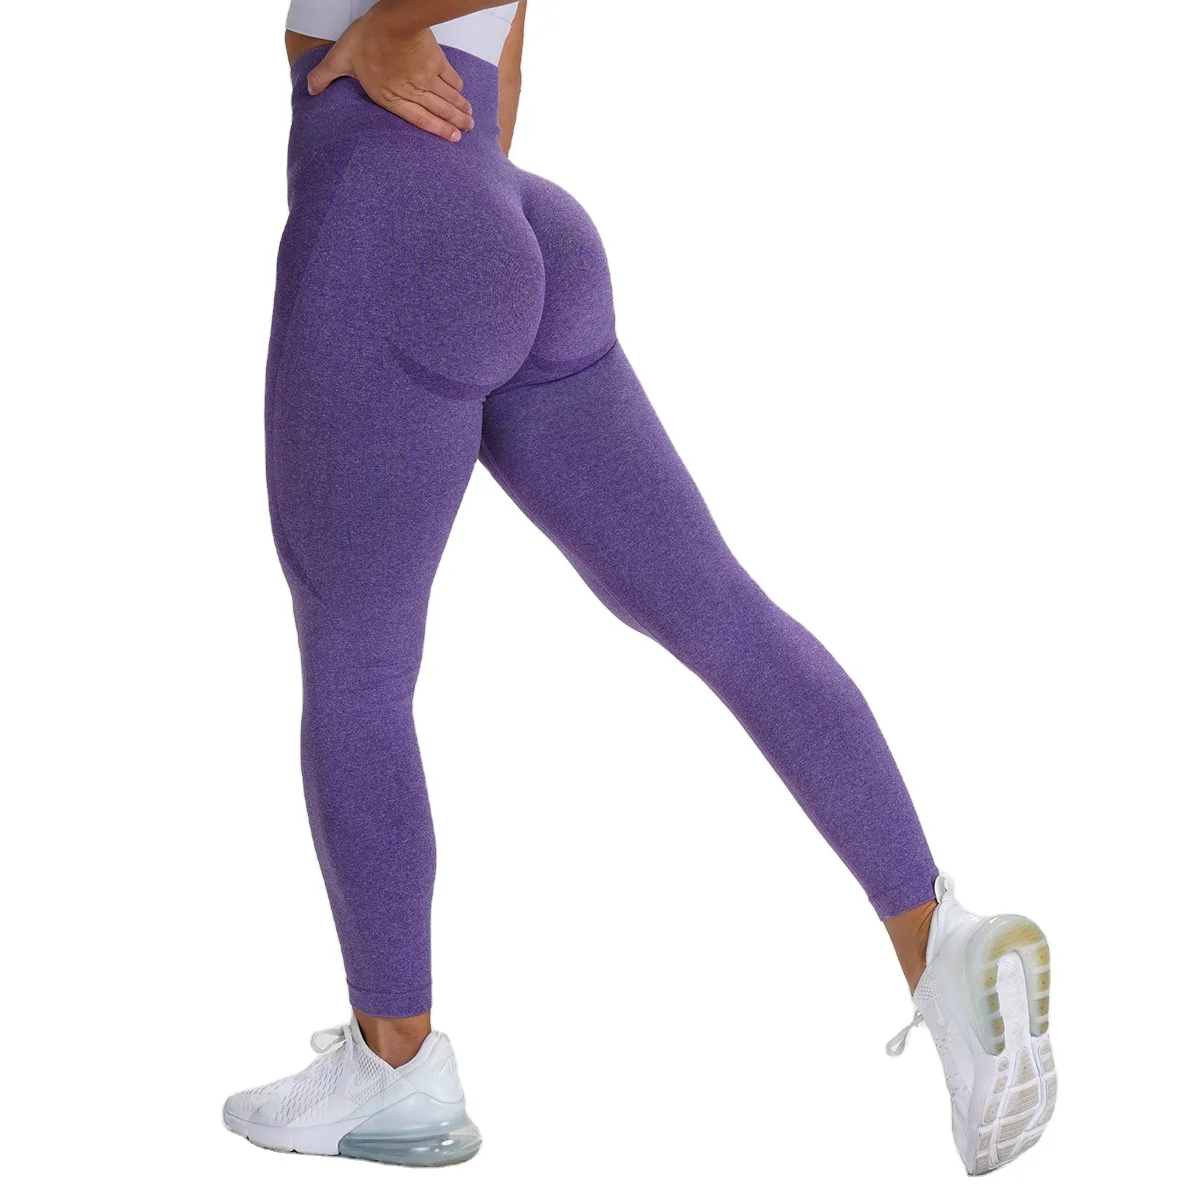 

Hot Selling Sexx Rsa Pts Pants Sports Suit Ms4 Leggins Gym Clothing Gleemerz Women S Activewear Sets 2021, Picture shows